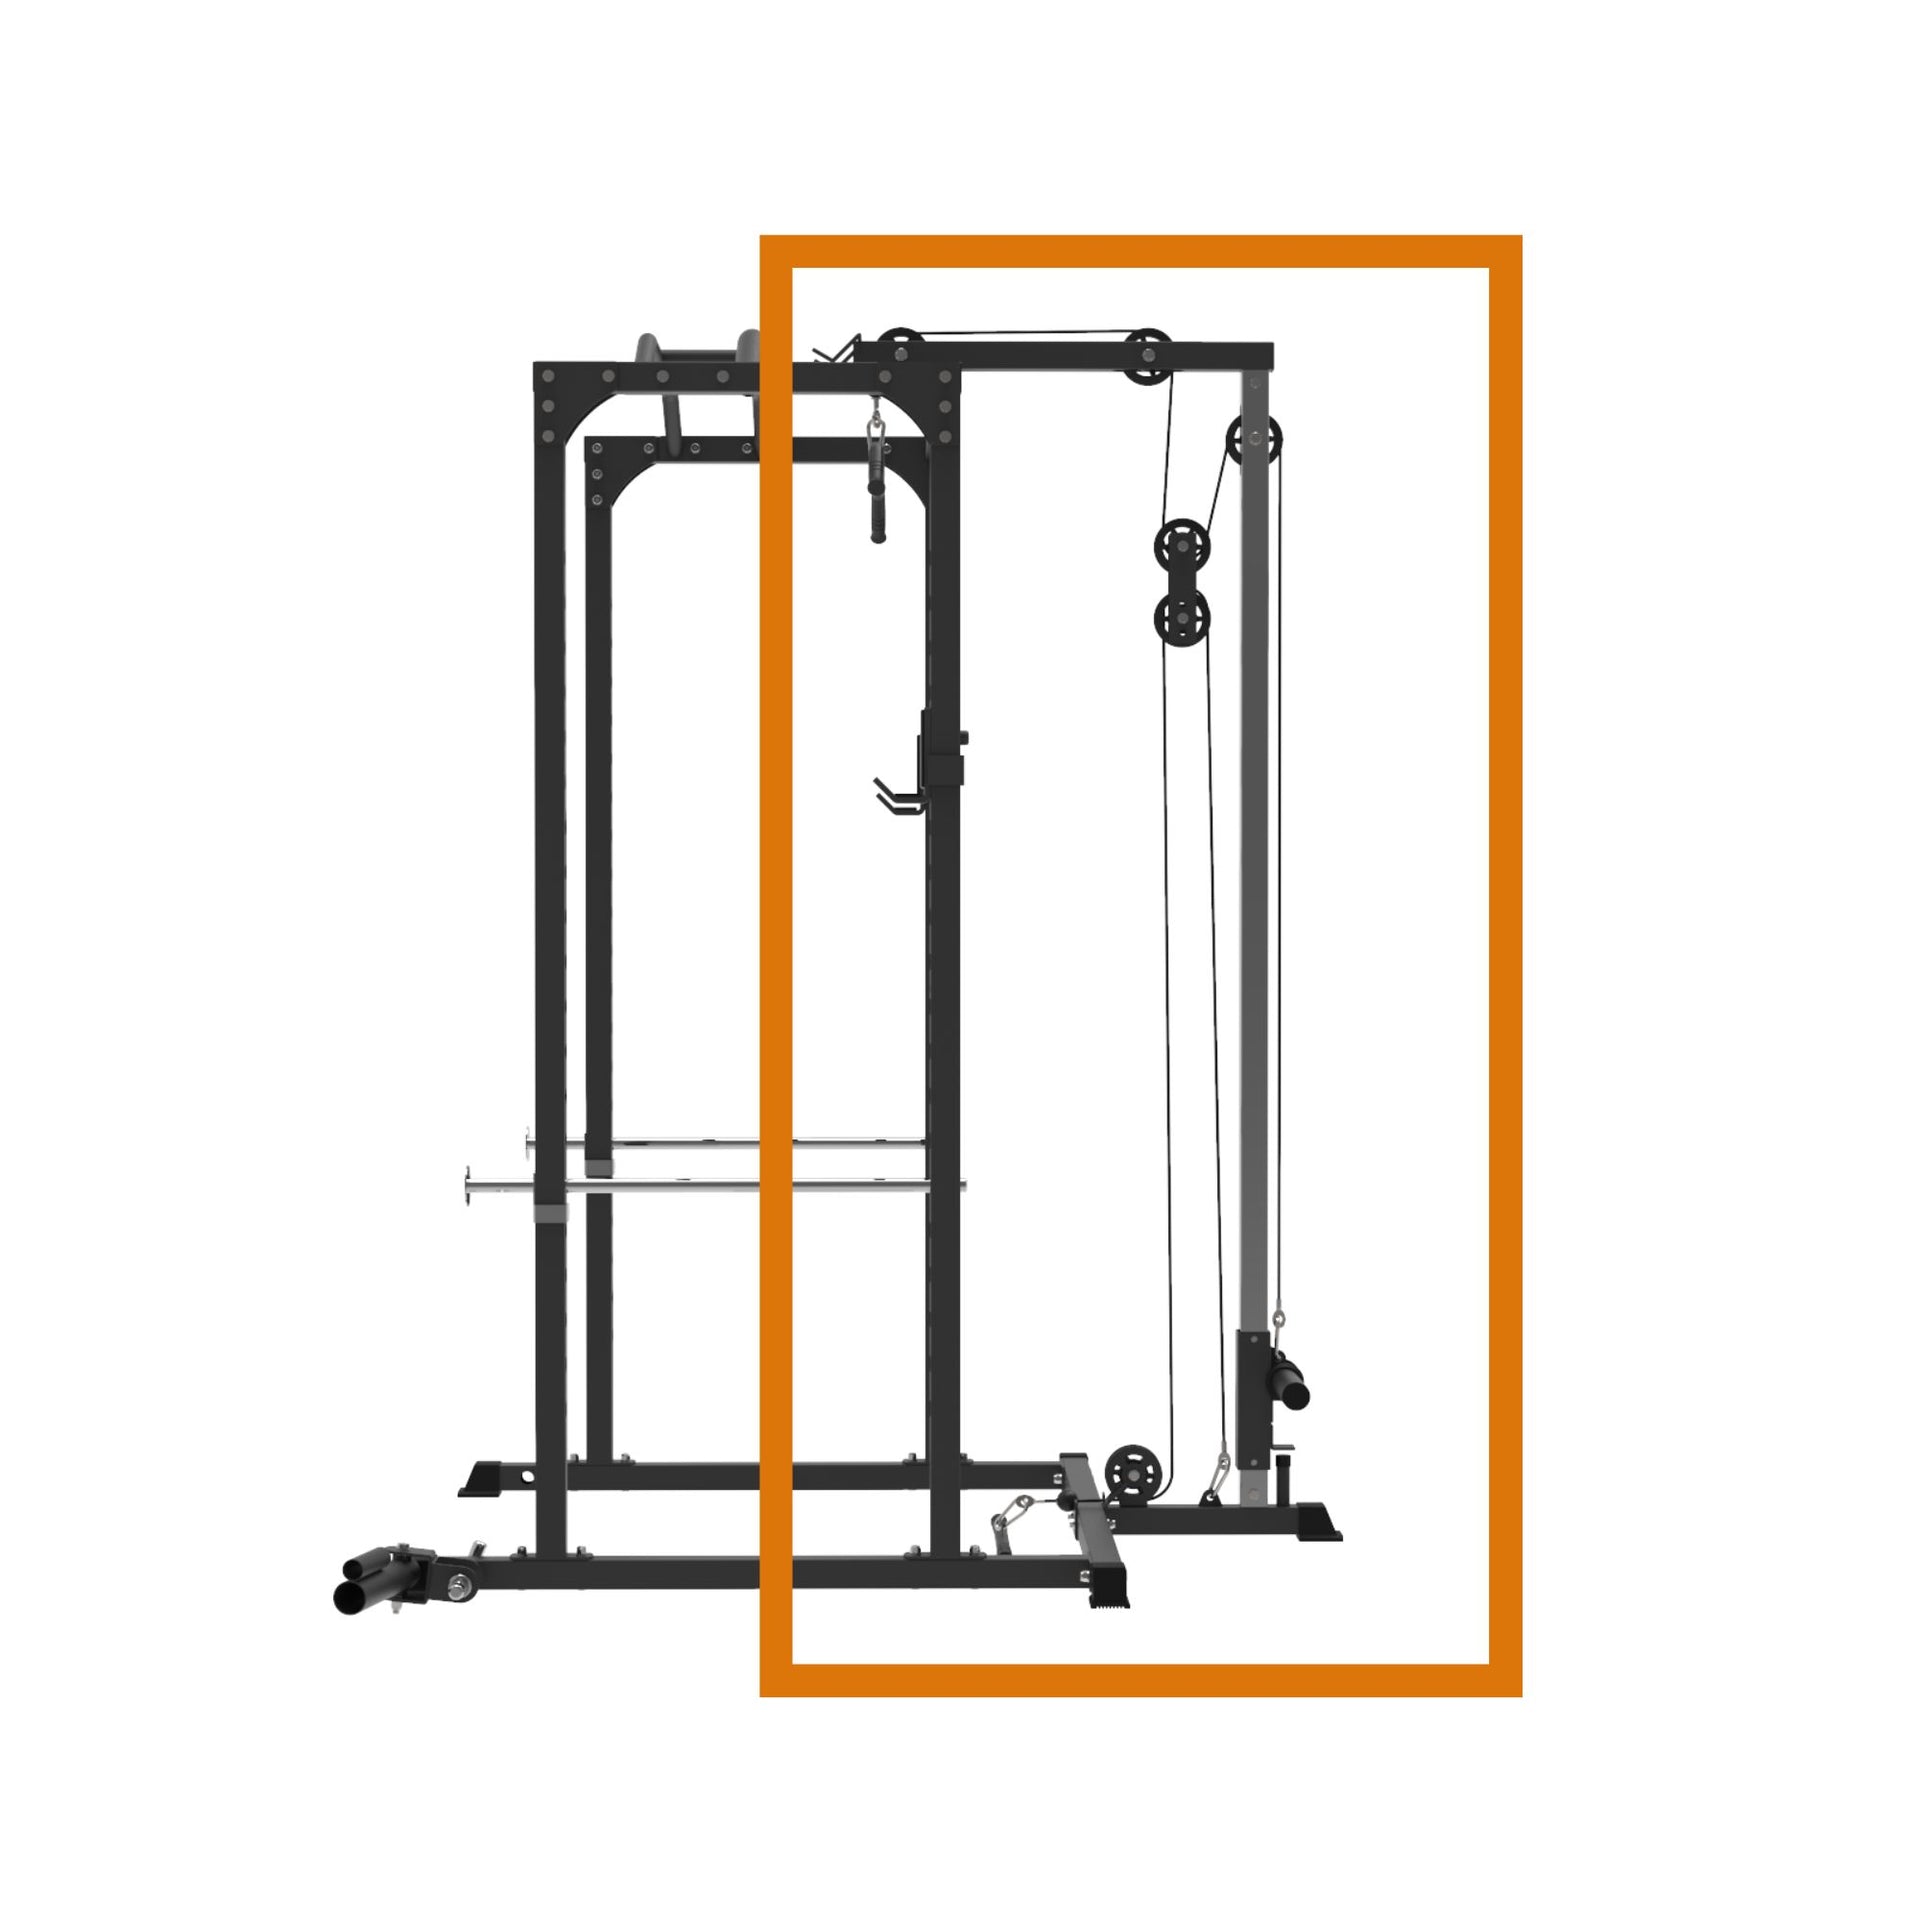 Lat pull down and low row attachment for rack